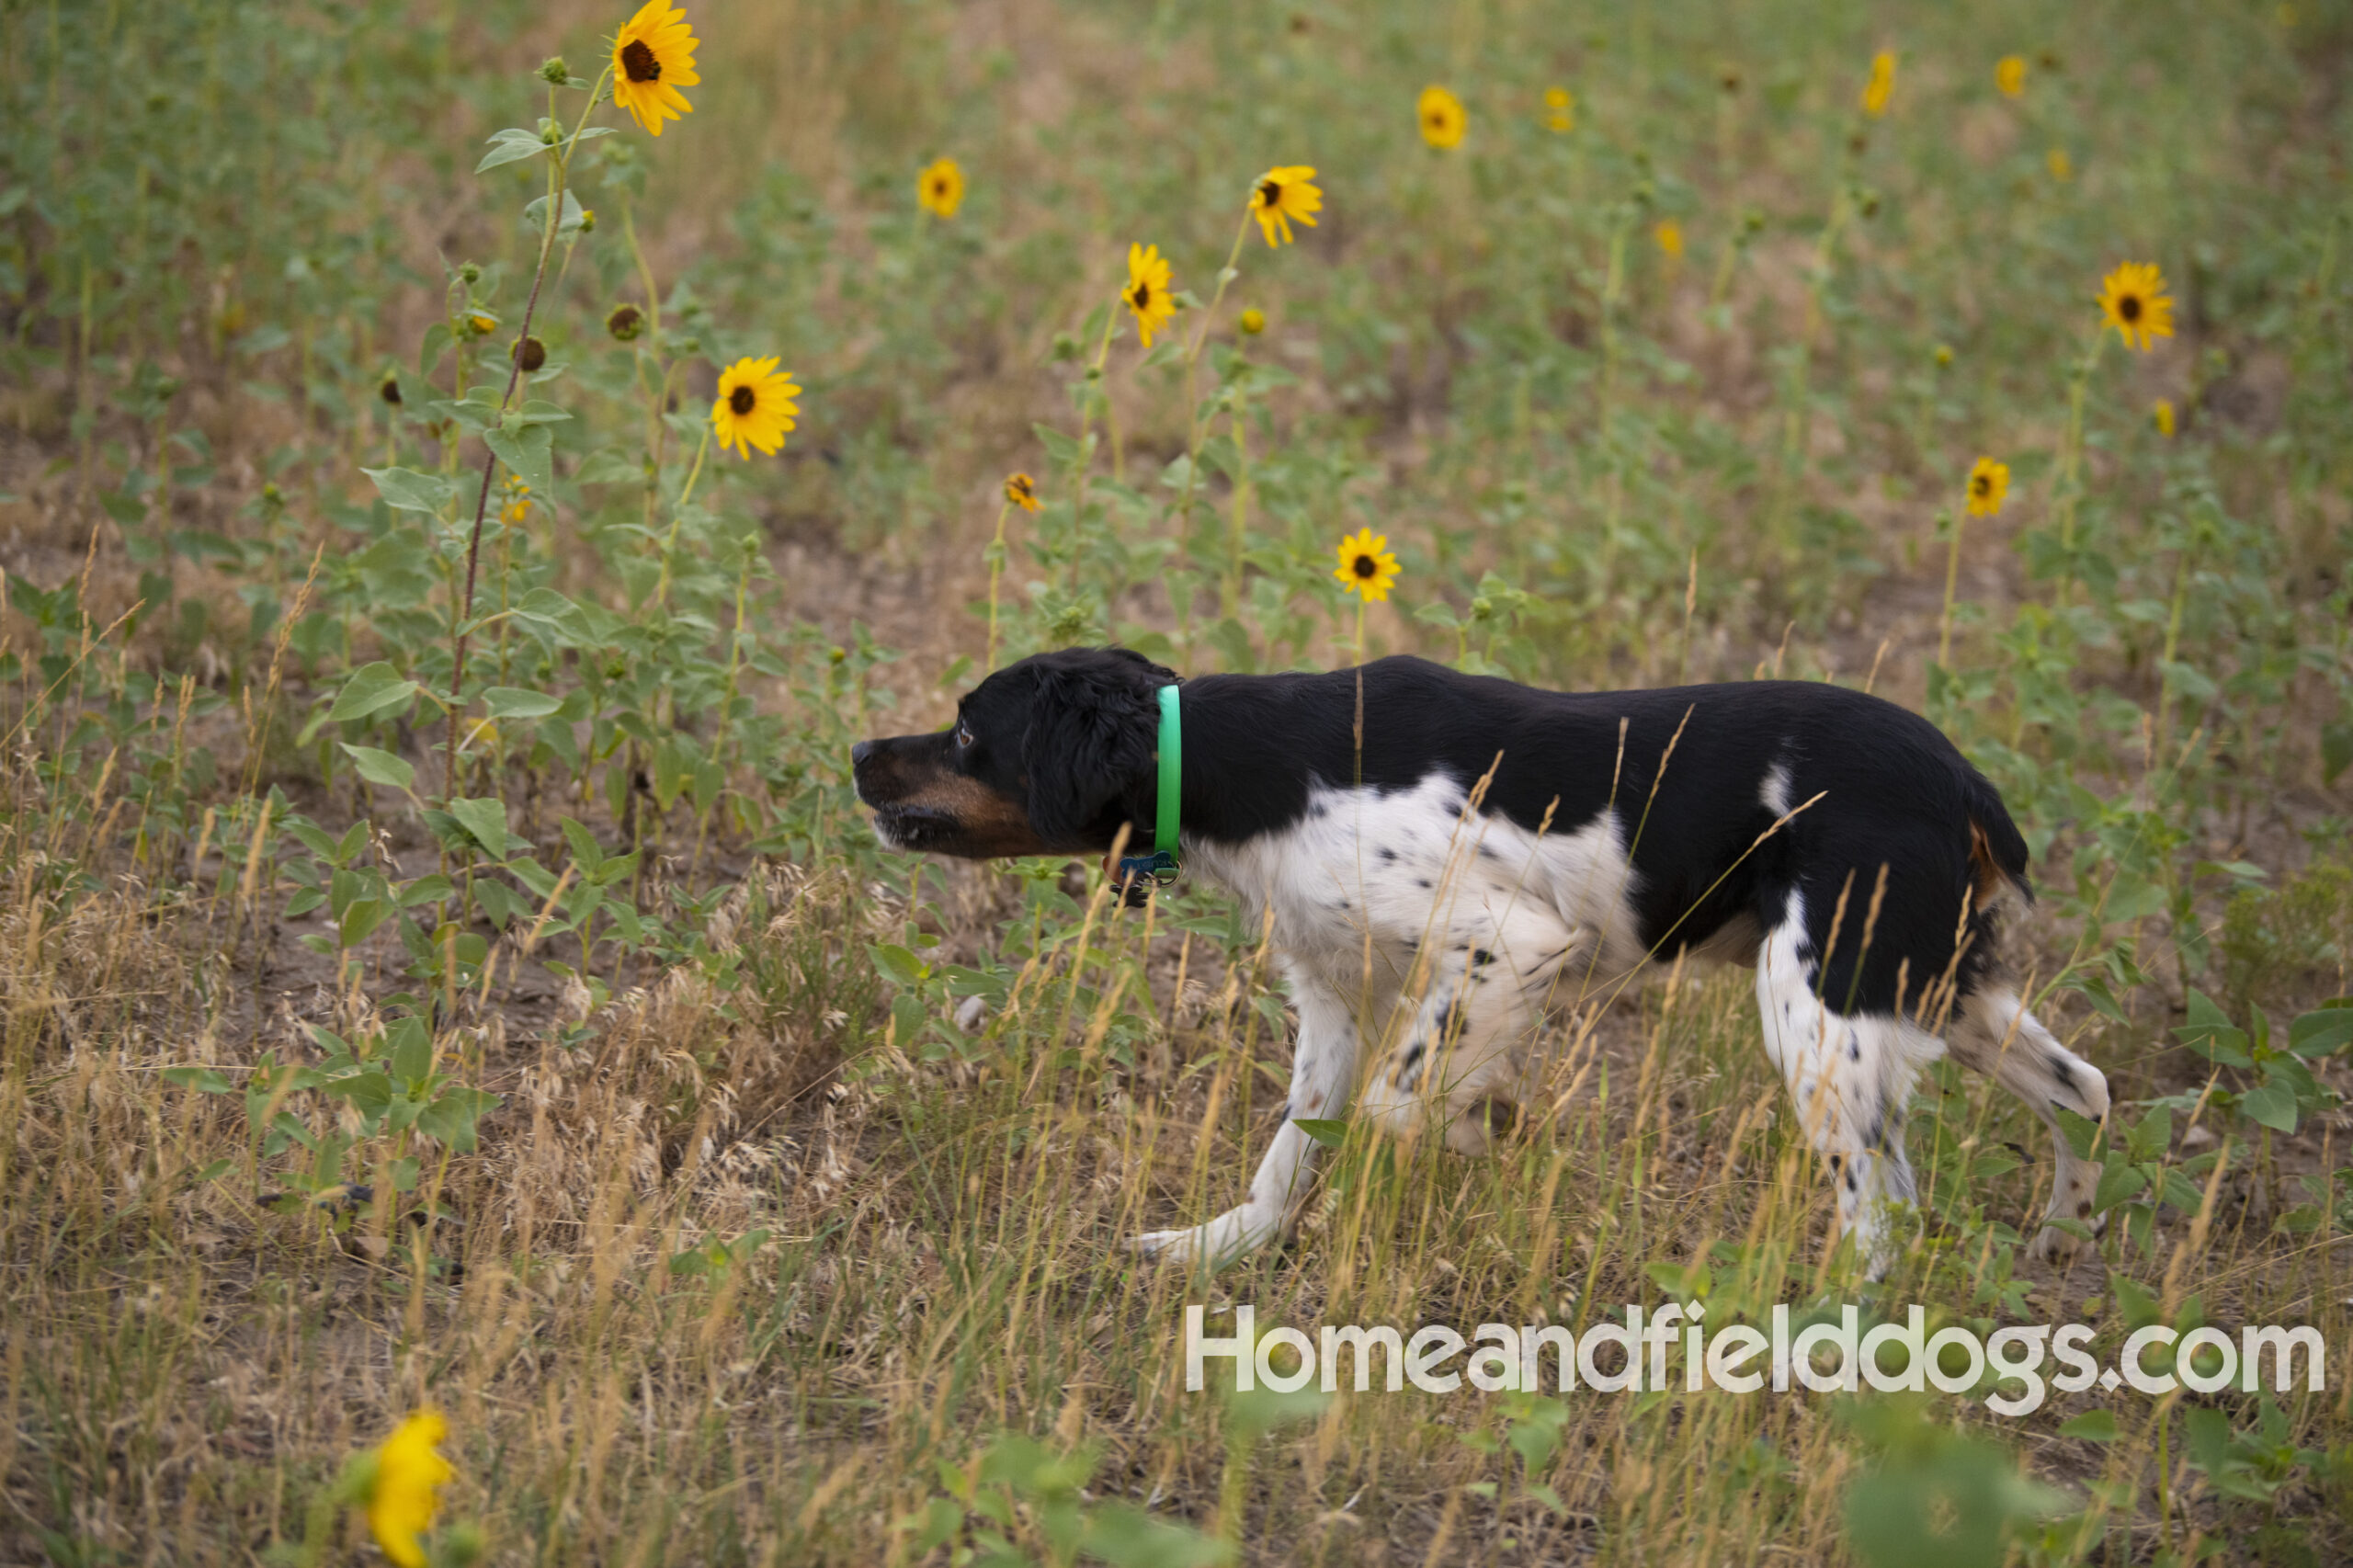 Black tricolor French Brittany male hunting partridge at homeandfielddogs.com